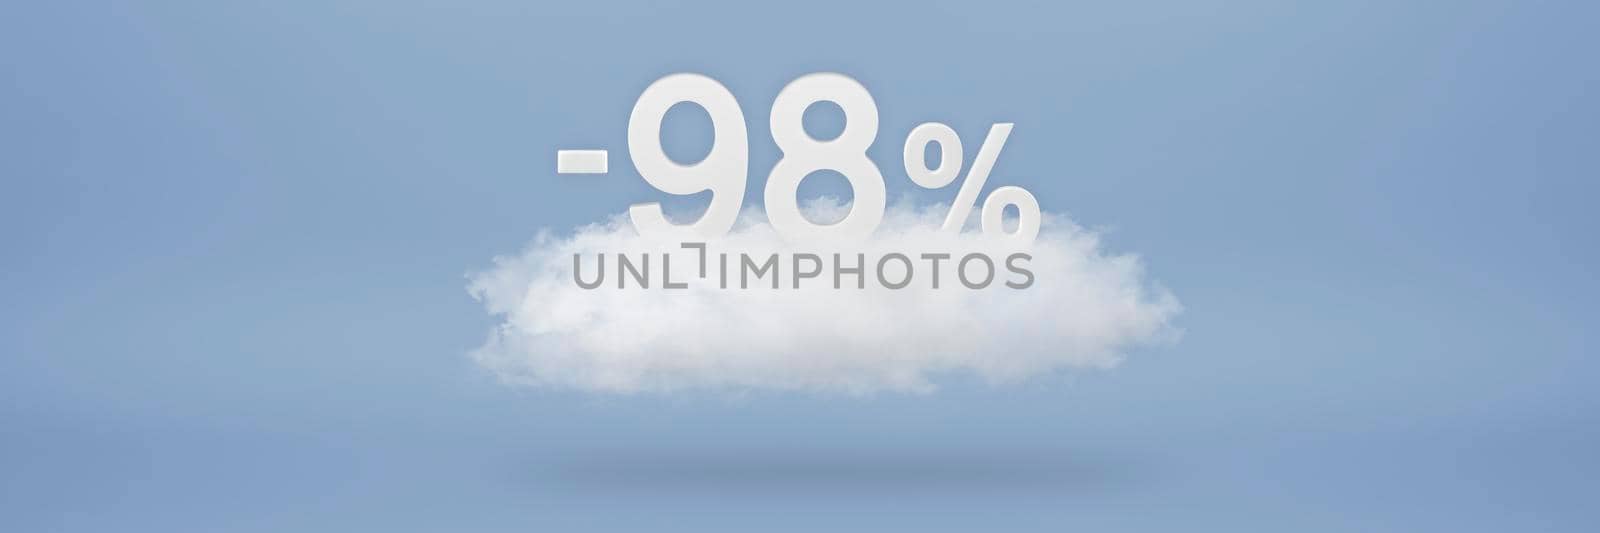 Discount 98 percent. Big discounts, sale up to ninety eight percent. 3D numbers float on a cloud on a blue background. Copy space. Advertising banner and poster to be inserted into the project by SERSOL